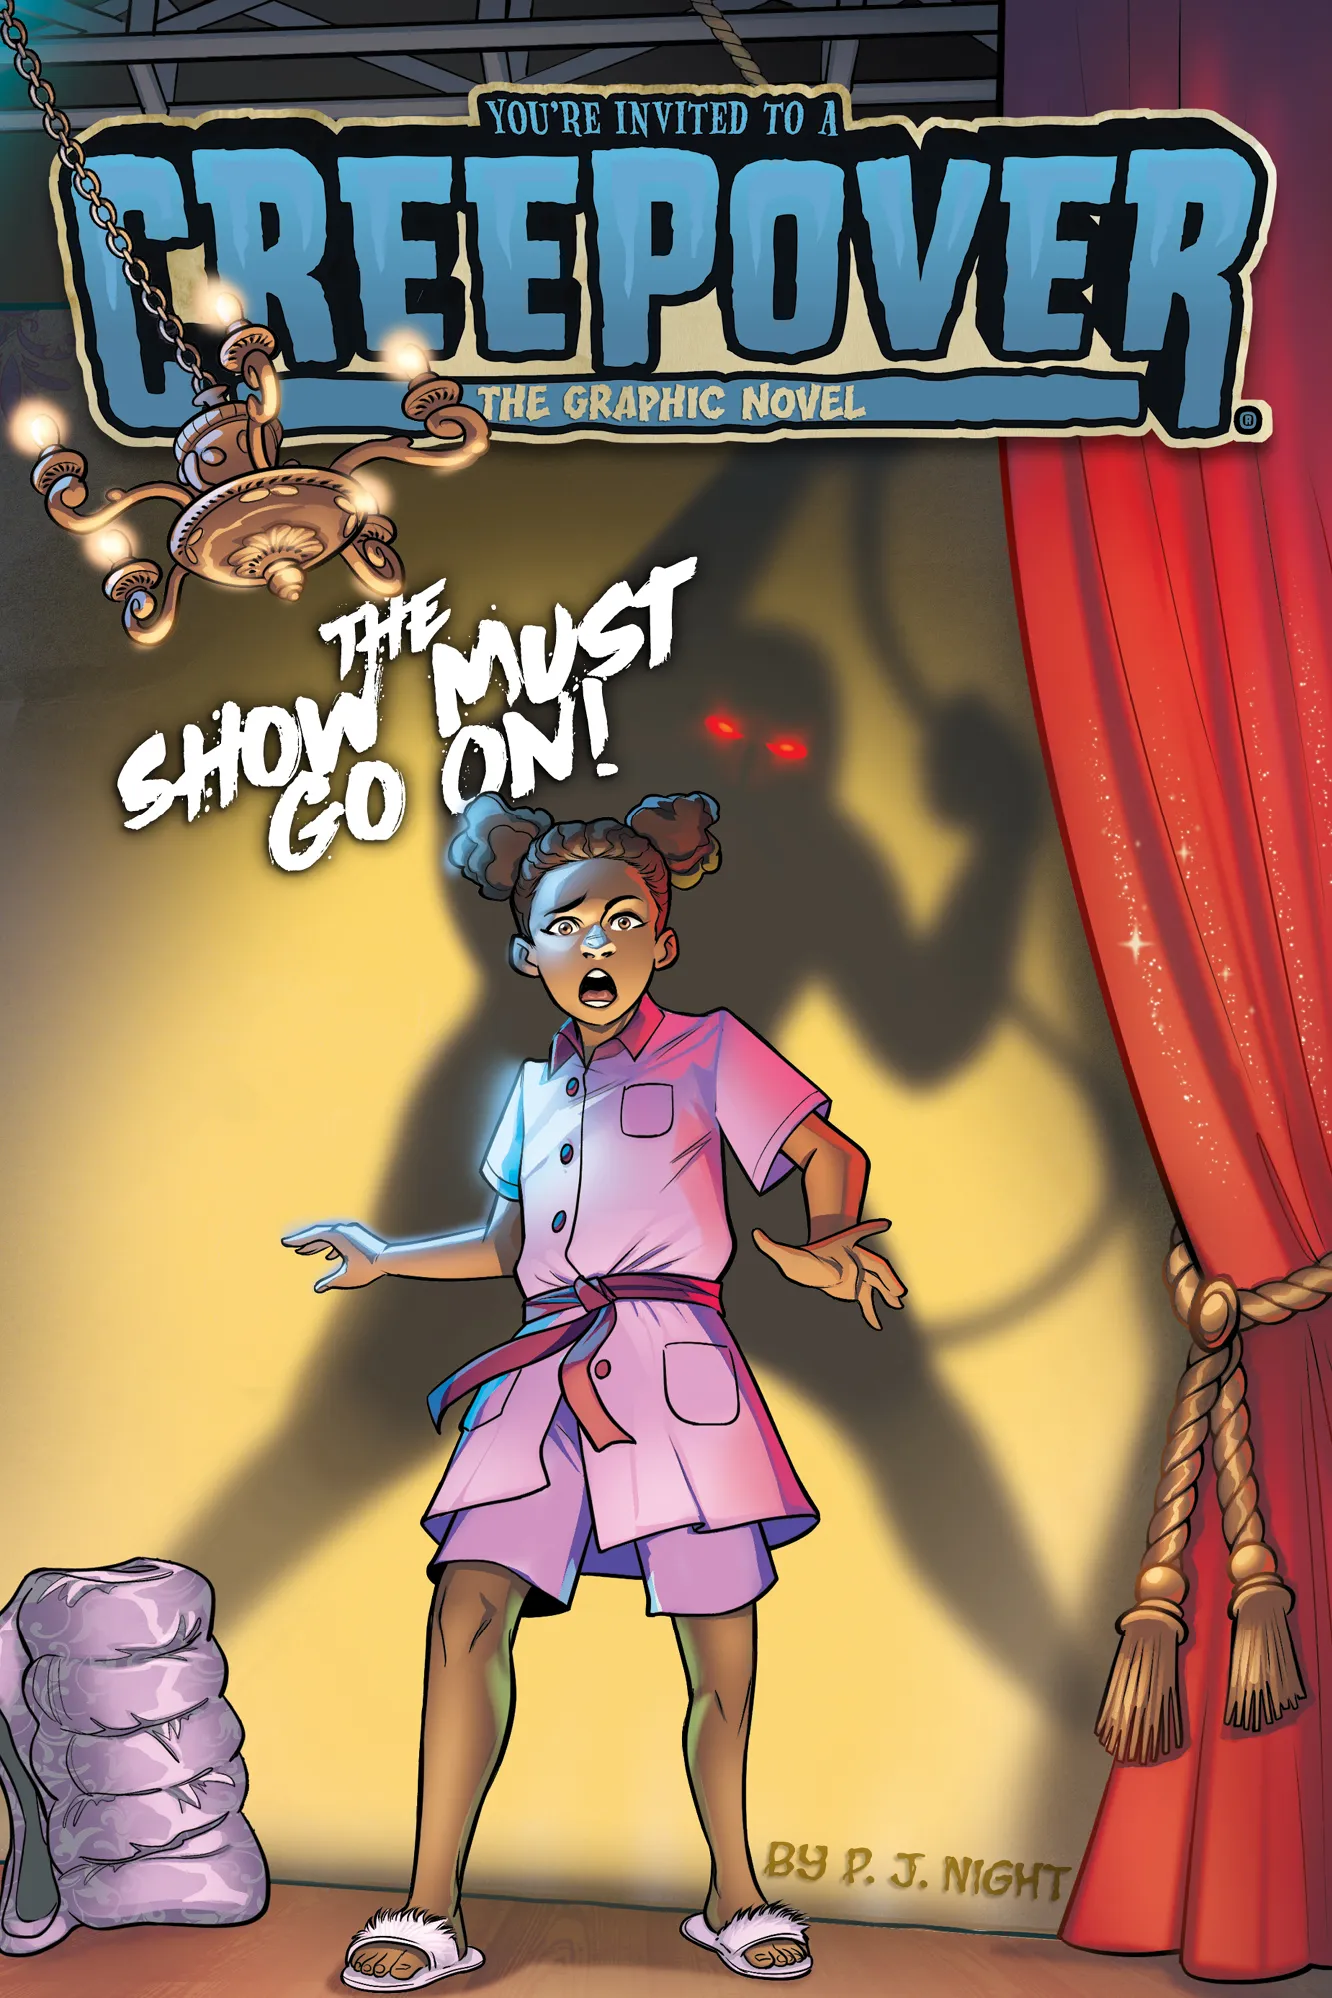 The Show Must Go On!: The Graphic Novel (You're Invited to a Creepover Graphic Novels #4)